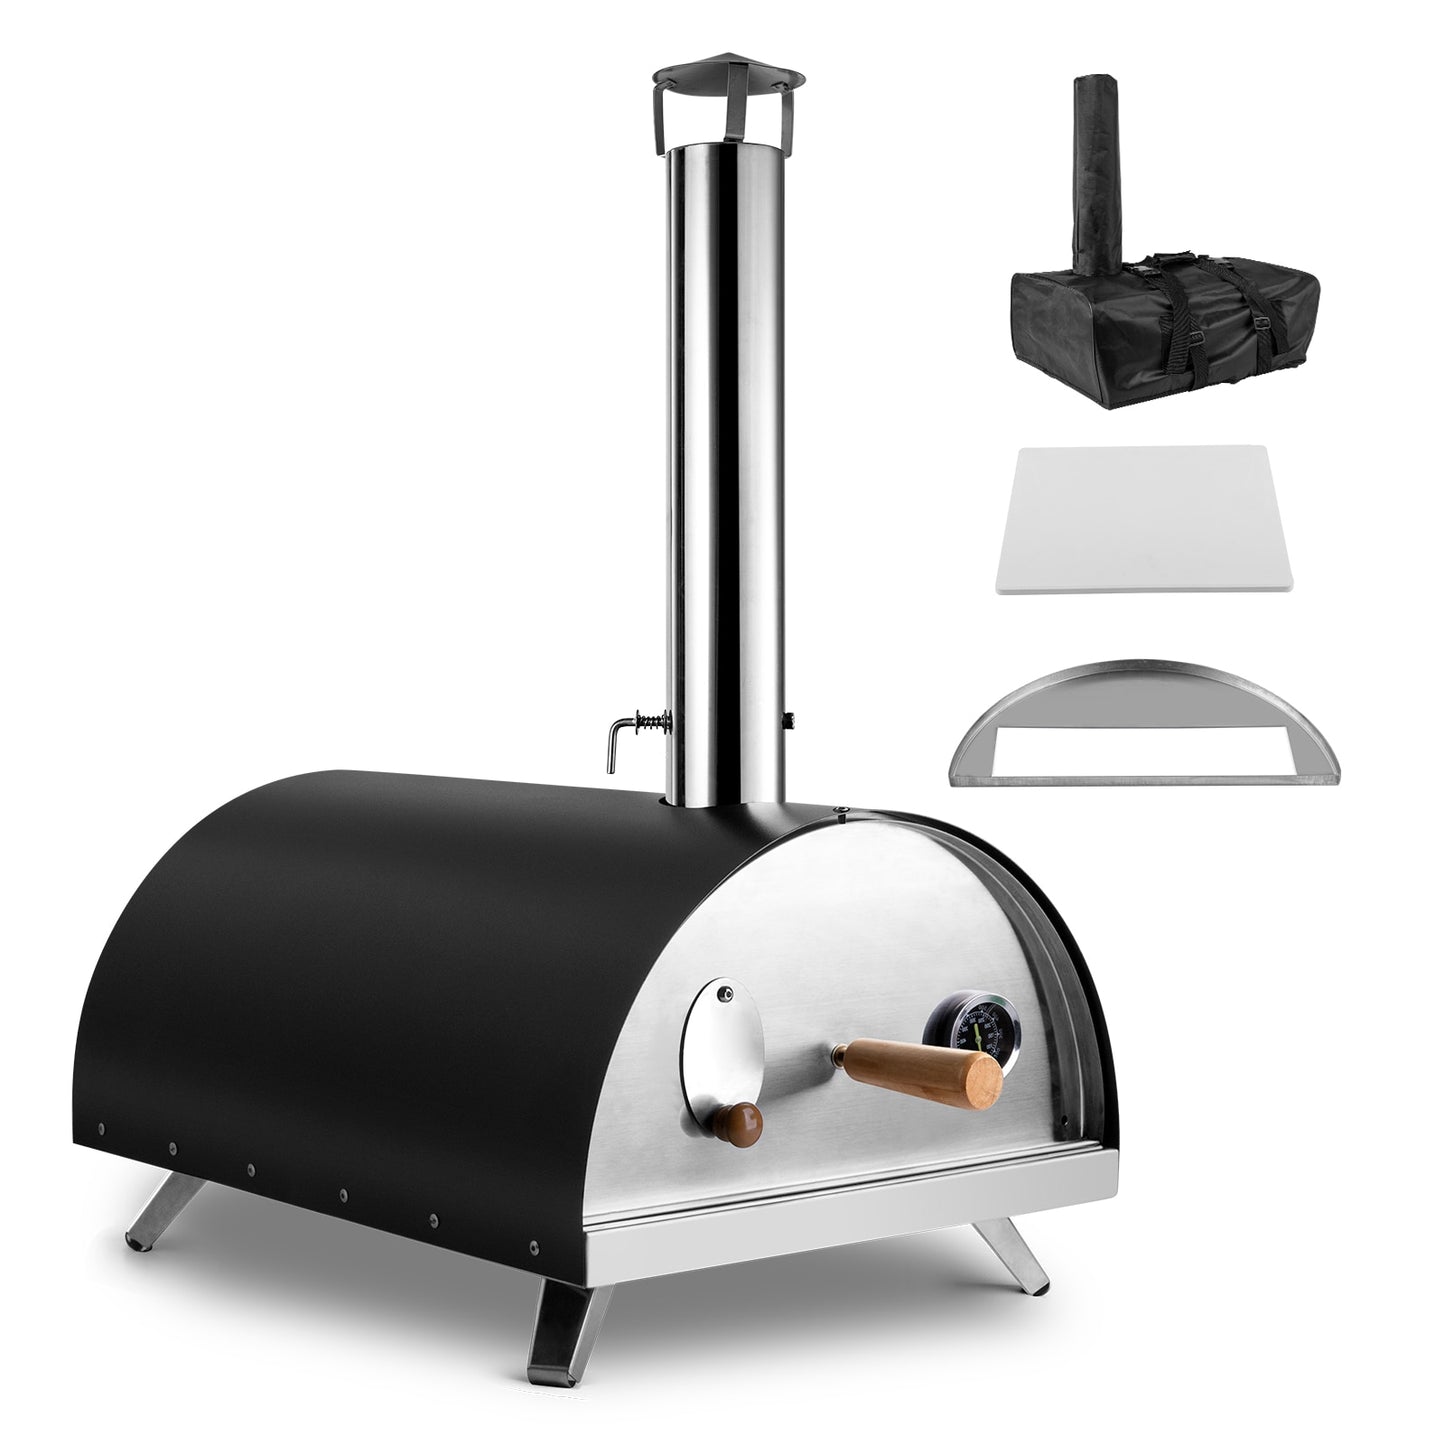 CHANGEMOORE  12 Inch Portable Outdoor Pizza Oven Pizza Maker Wood-Fired Adiabatic Pizza Machine Wood Pellet Burning Pizza Oven